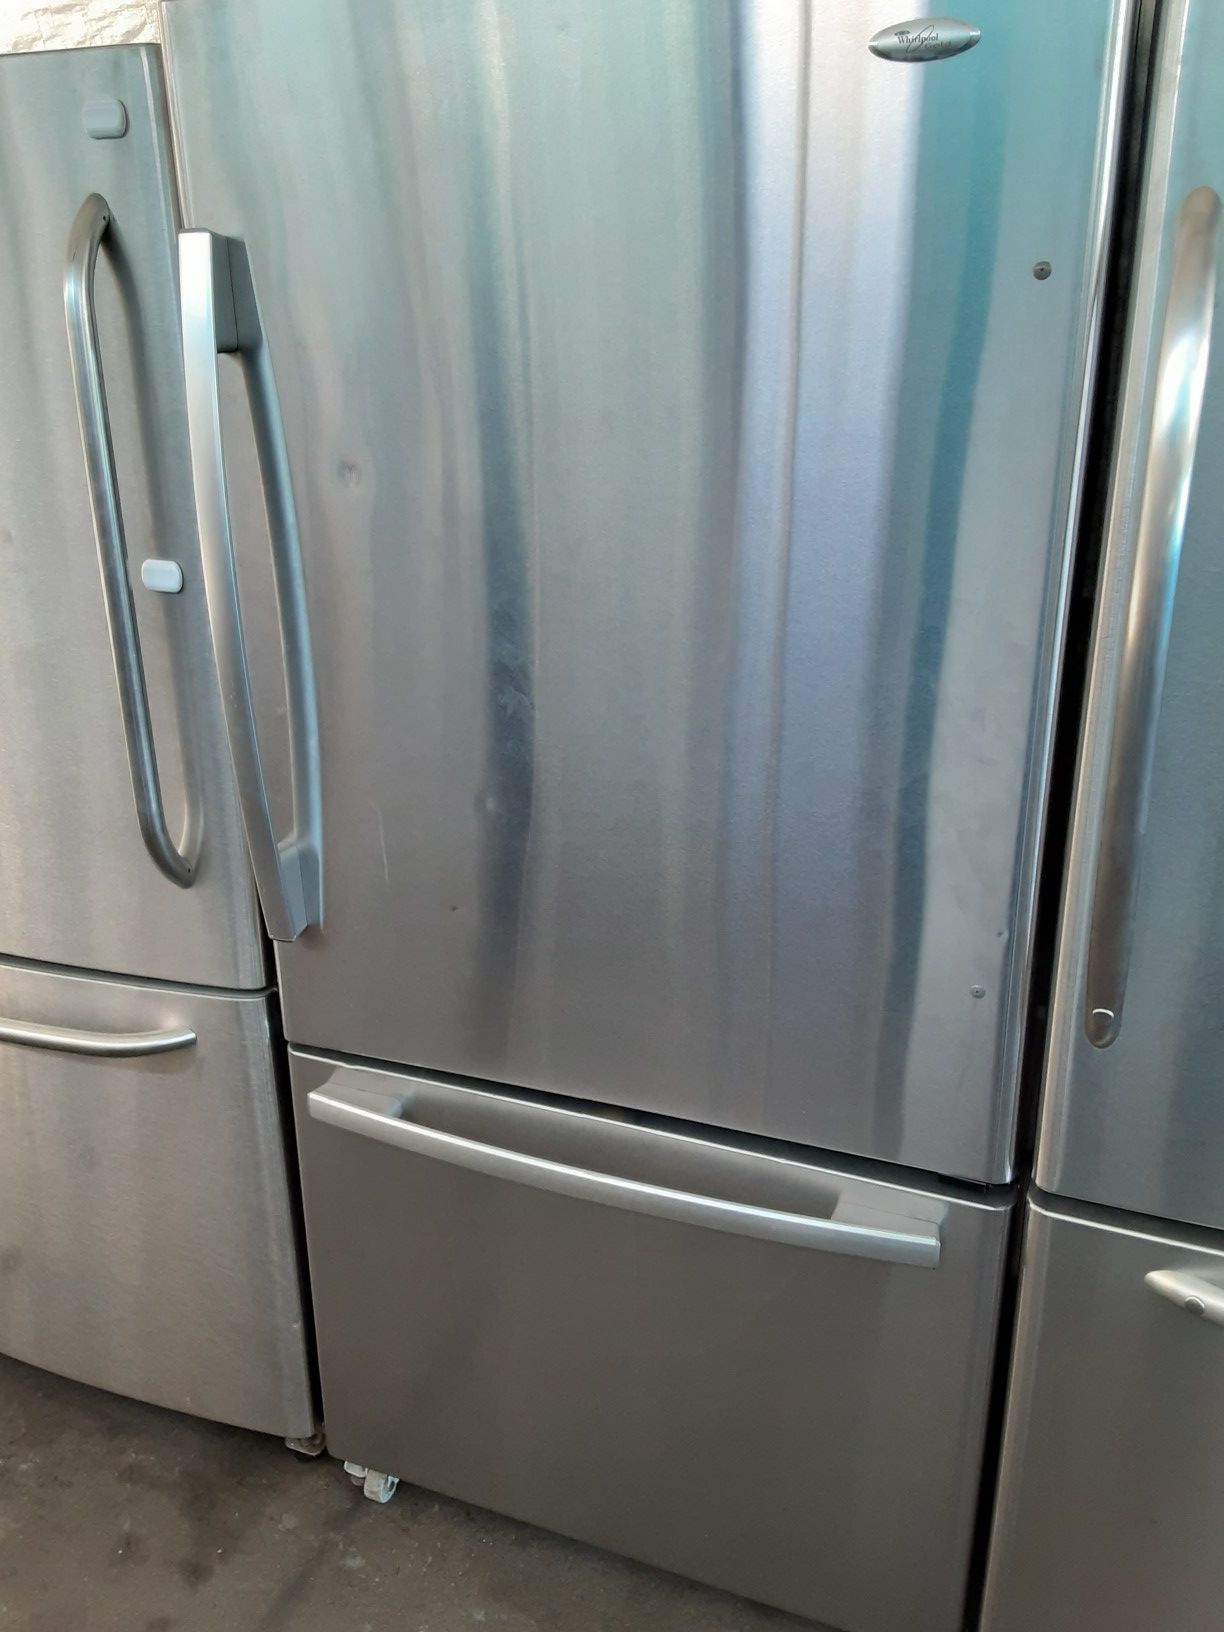 $399 Whirlpool stainless bottom freezer fridge includes delivering the San Fernando Valley a warranty and installation